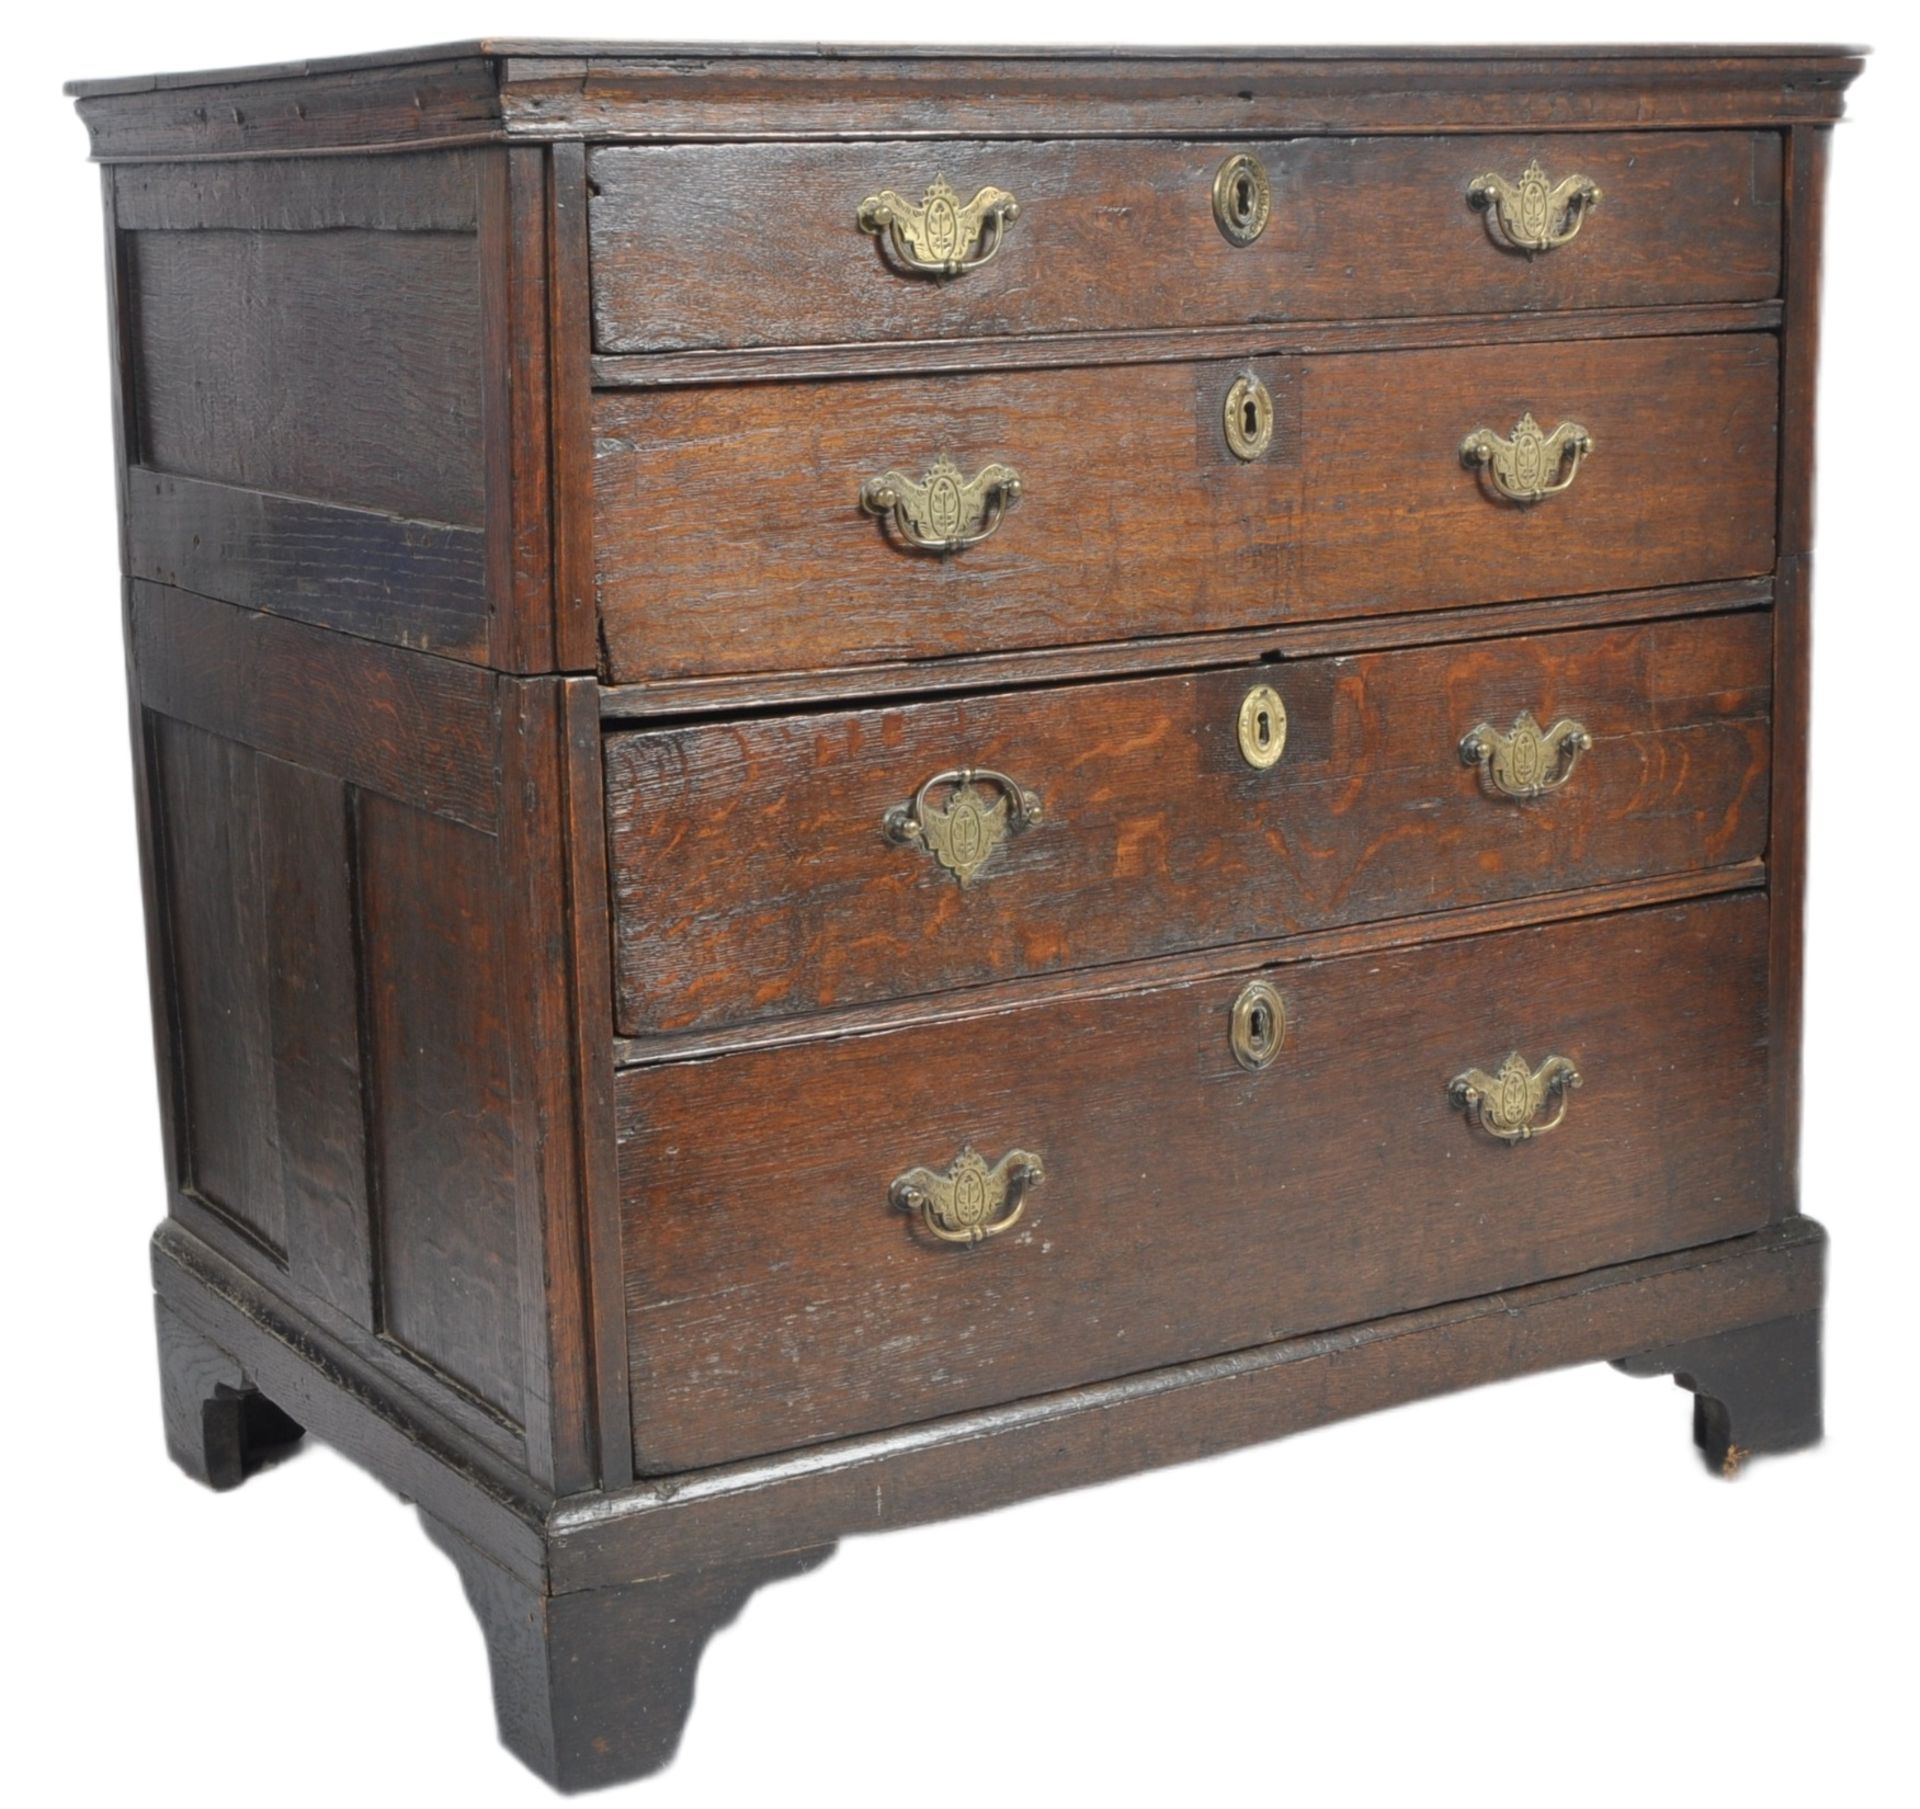 17TH CENTURY OAK & ELM COMMONWEALTH CHEST OF DRAWERS